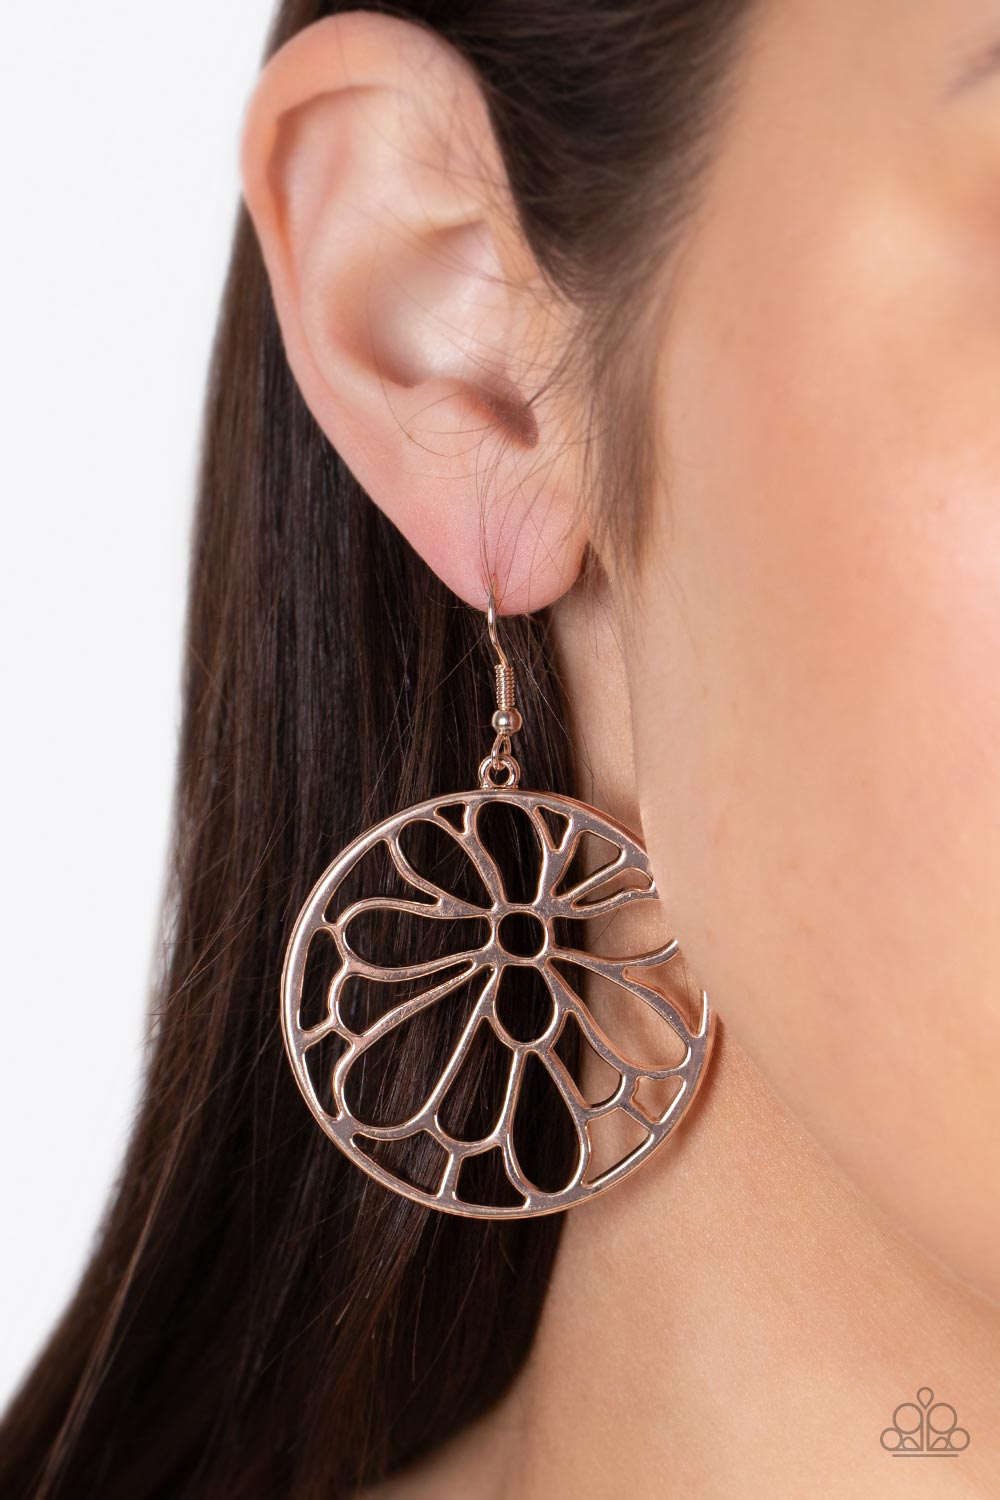 Glowing Glades - Rose Gold Earrings - Paparazzi Accessories